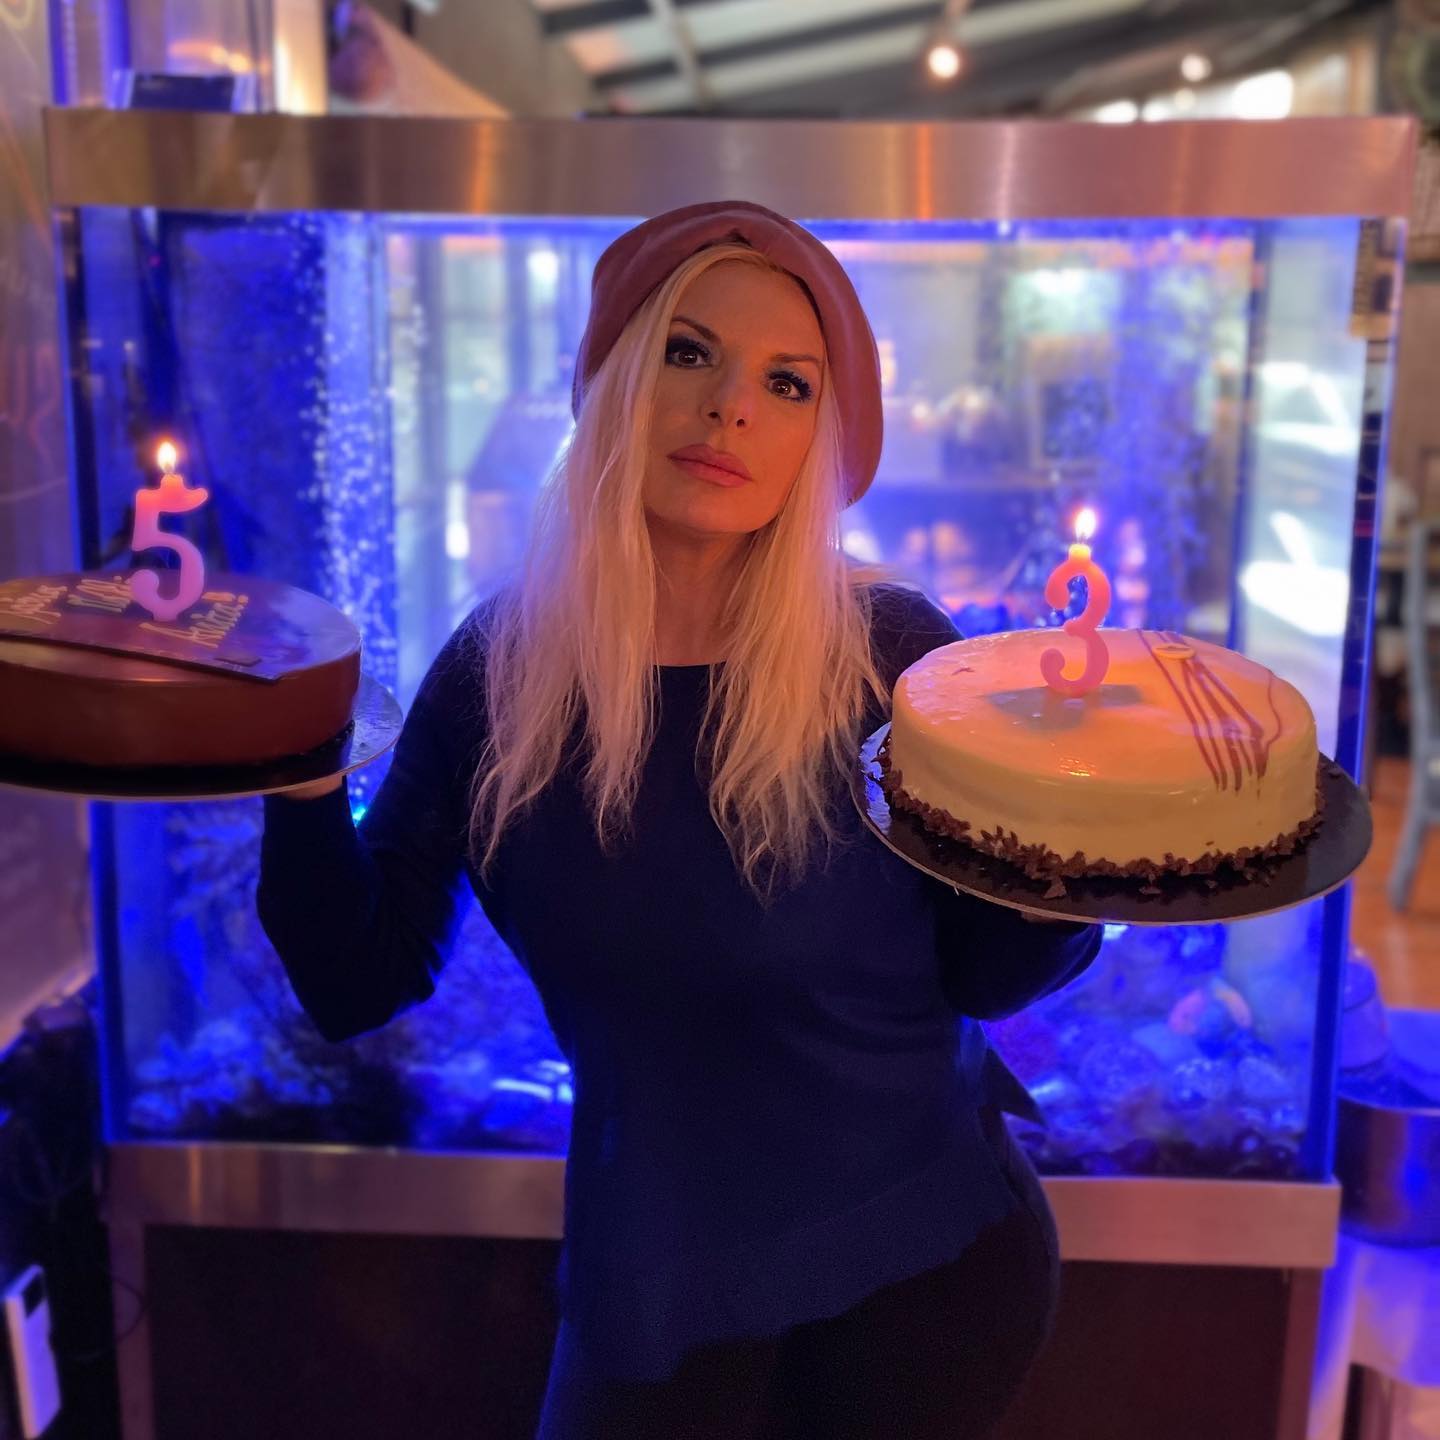 Photo by Annita Pania on April 25 2023. May be an image of 1 person blonde hair and chocolate cake